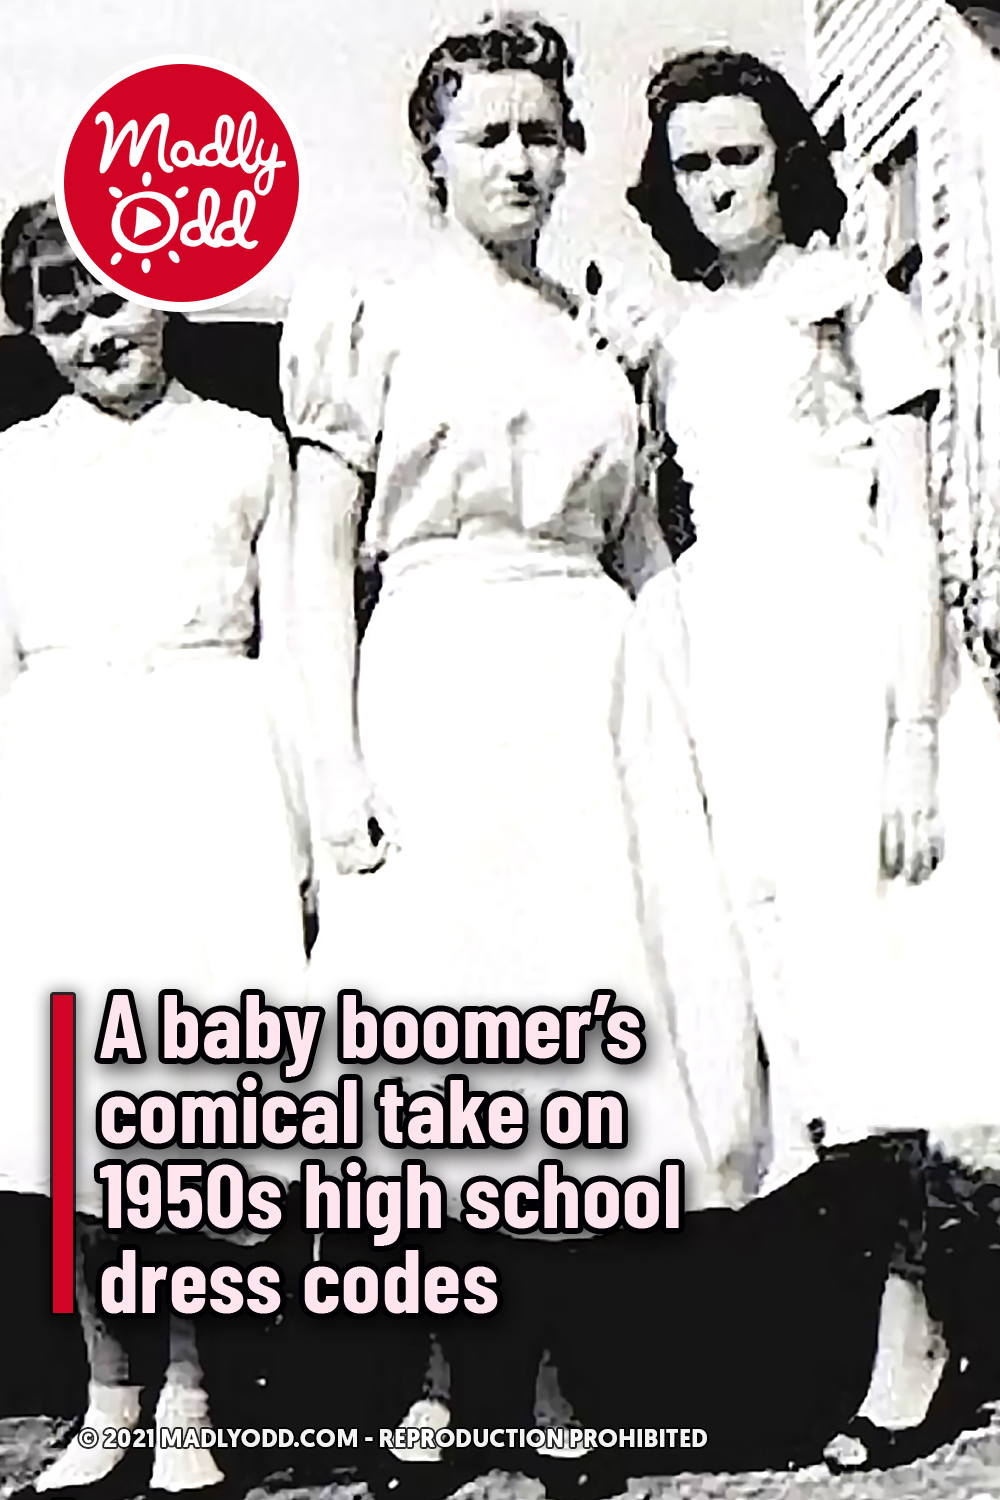 A baby boomer’s comical take on 1950s high school dress codes